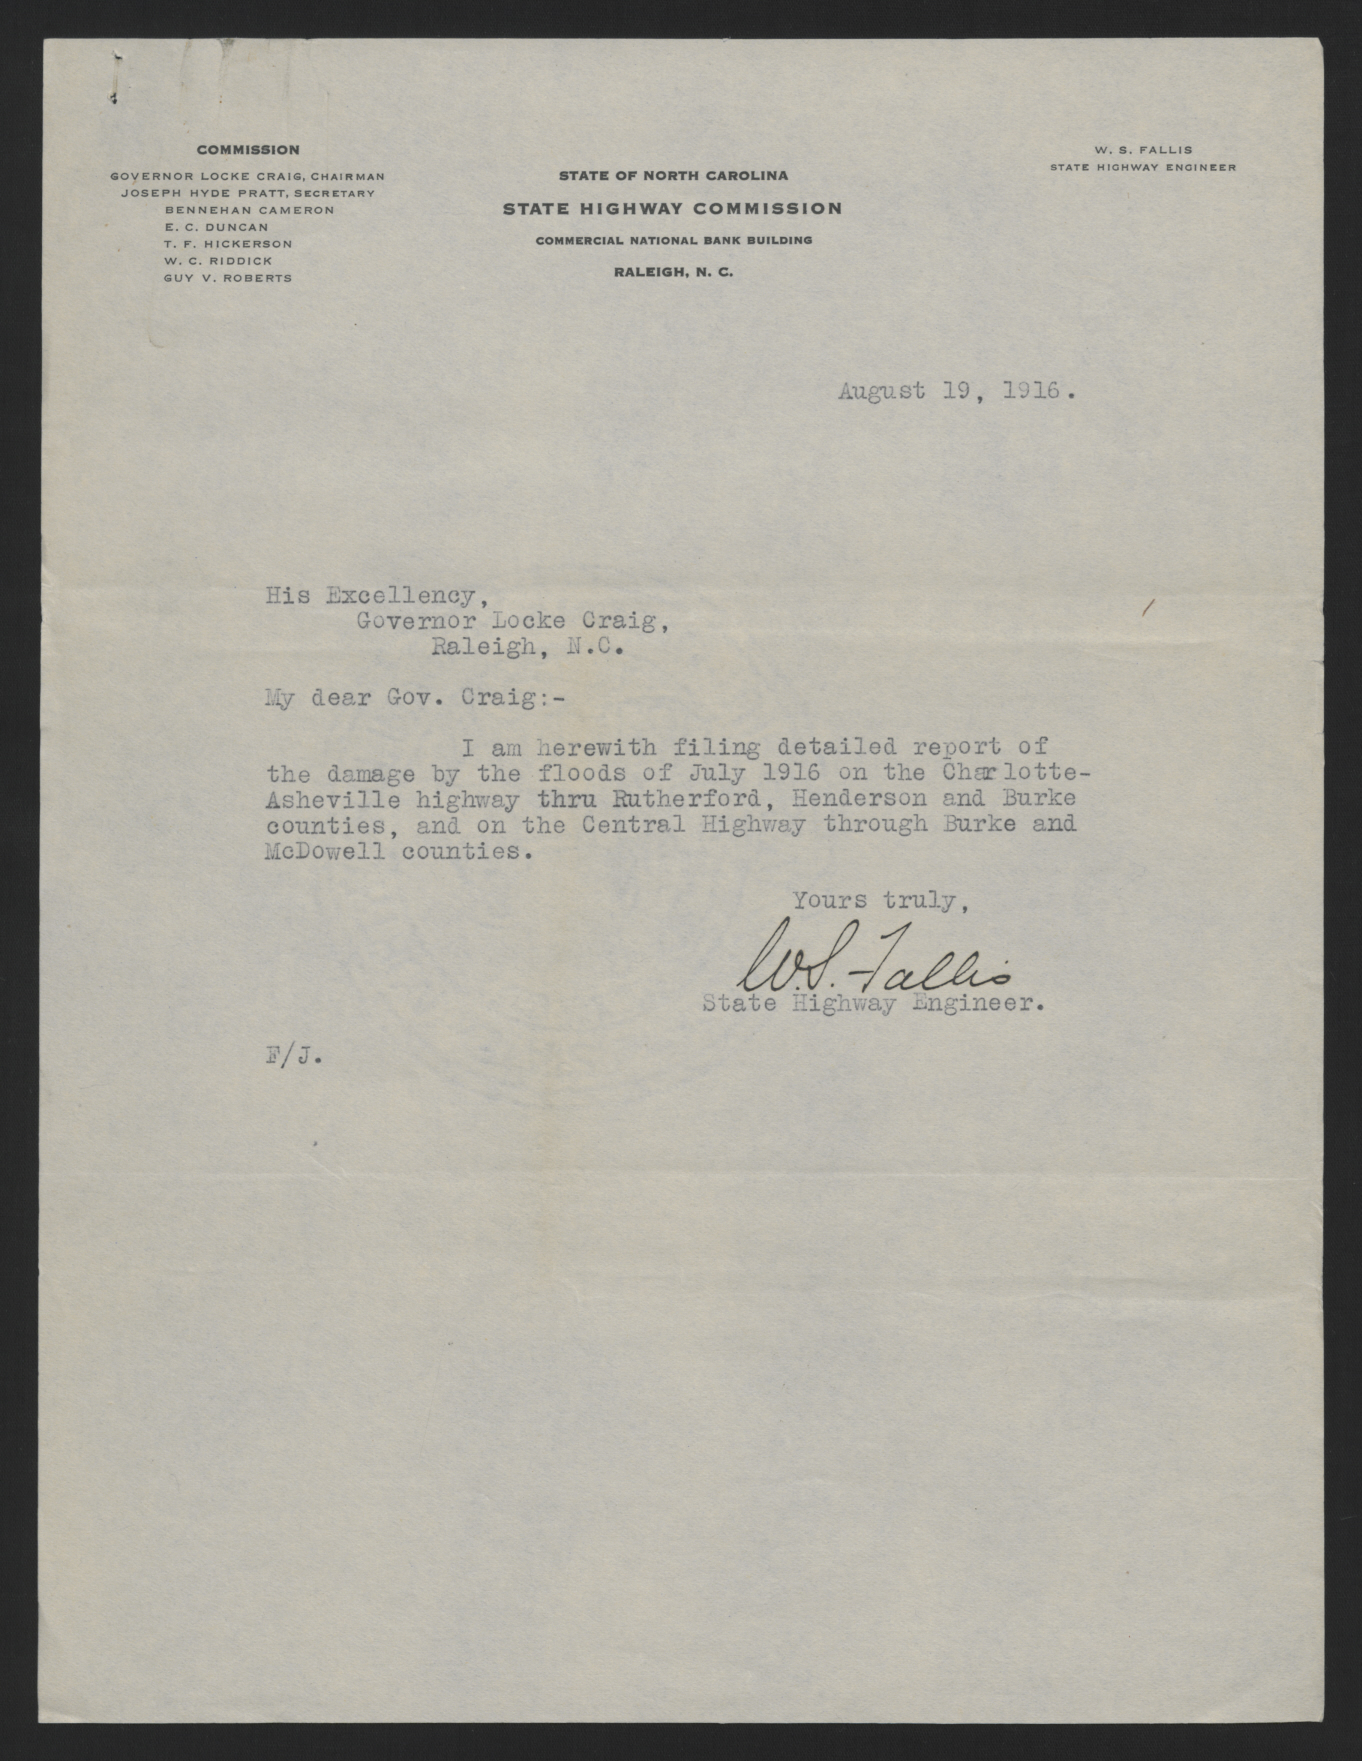 Letter from Fallis to Craig, August 19, 1916